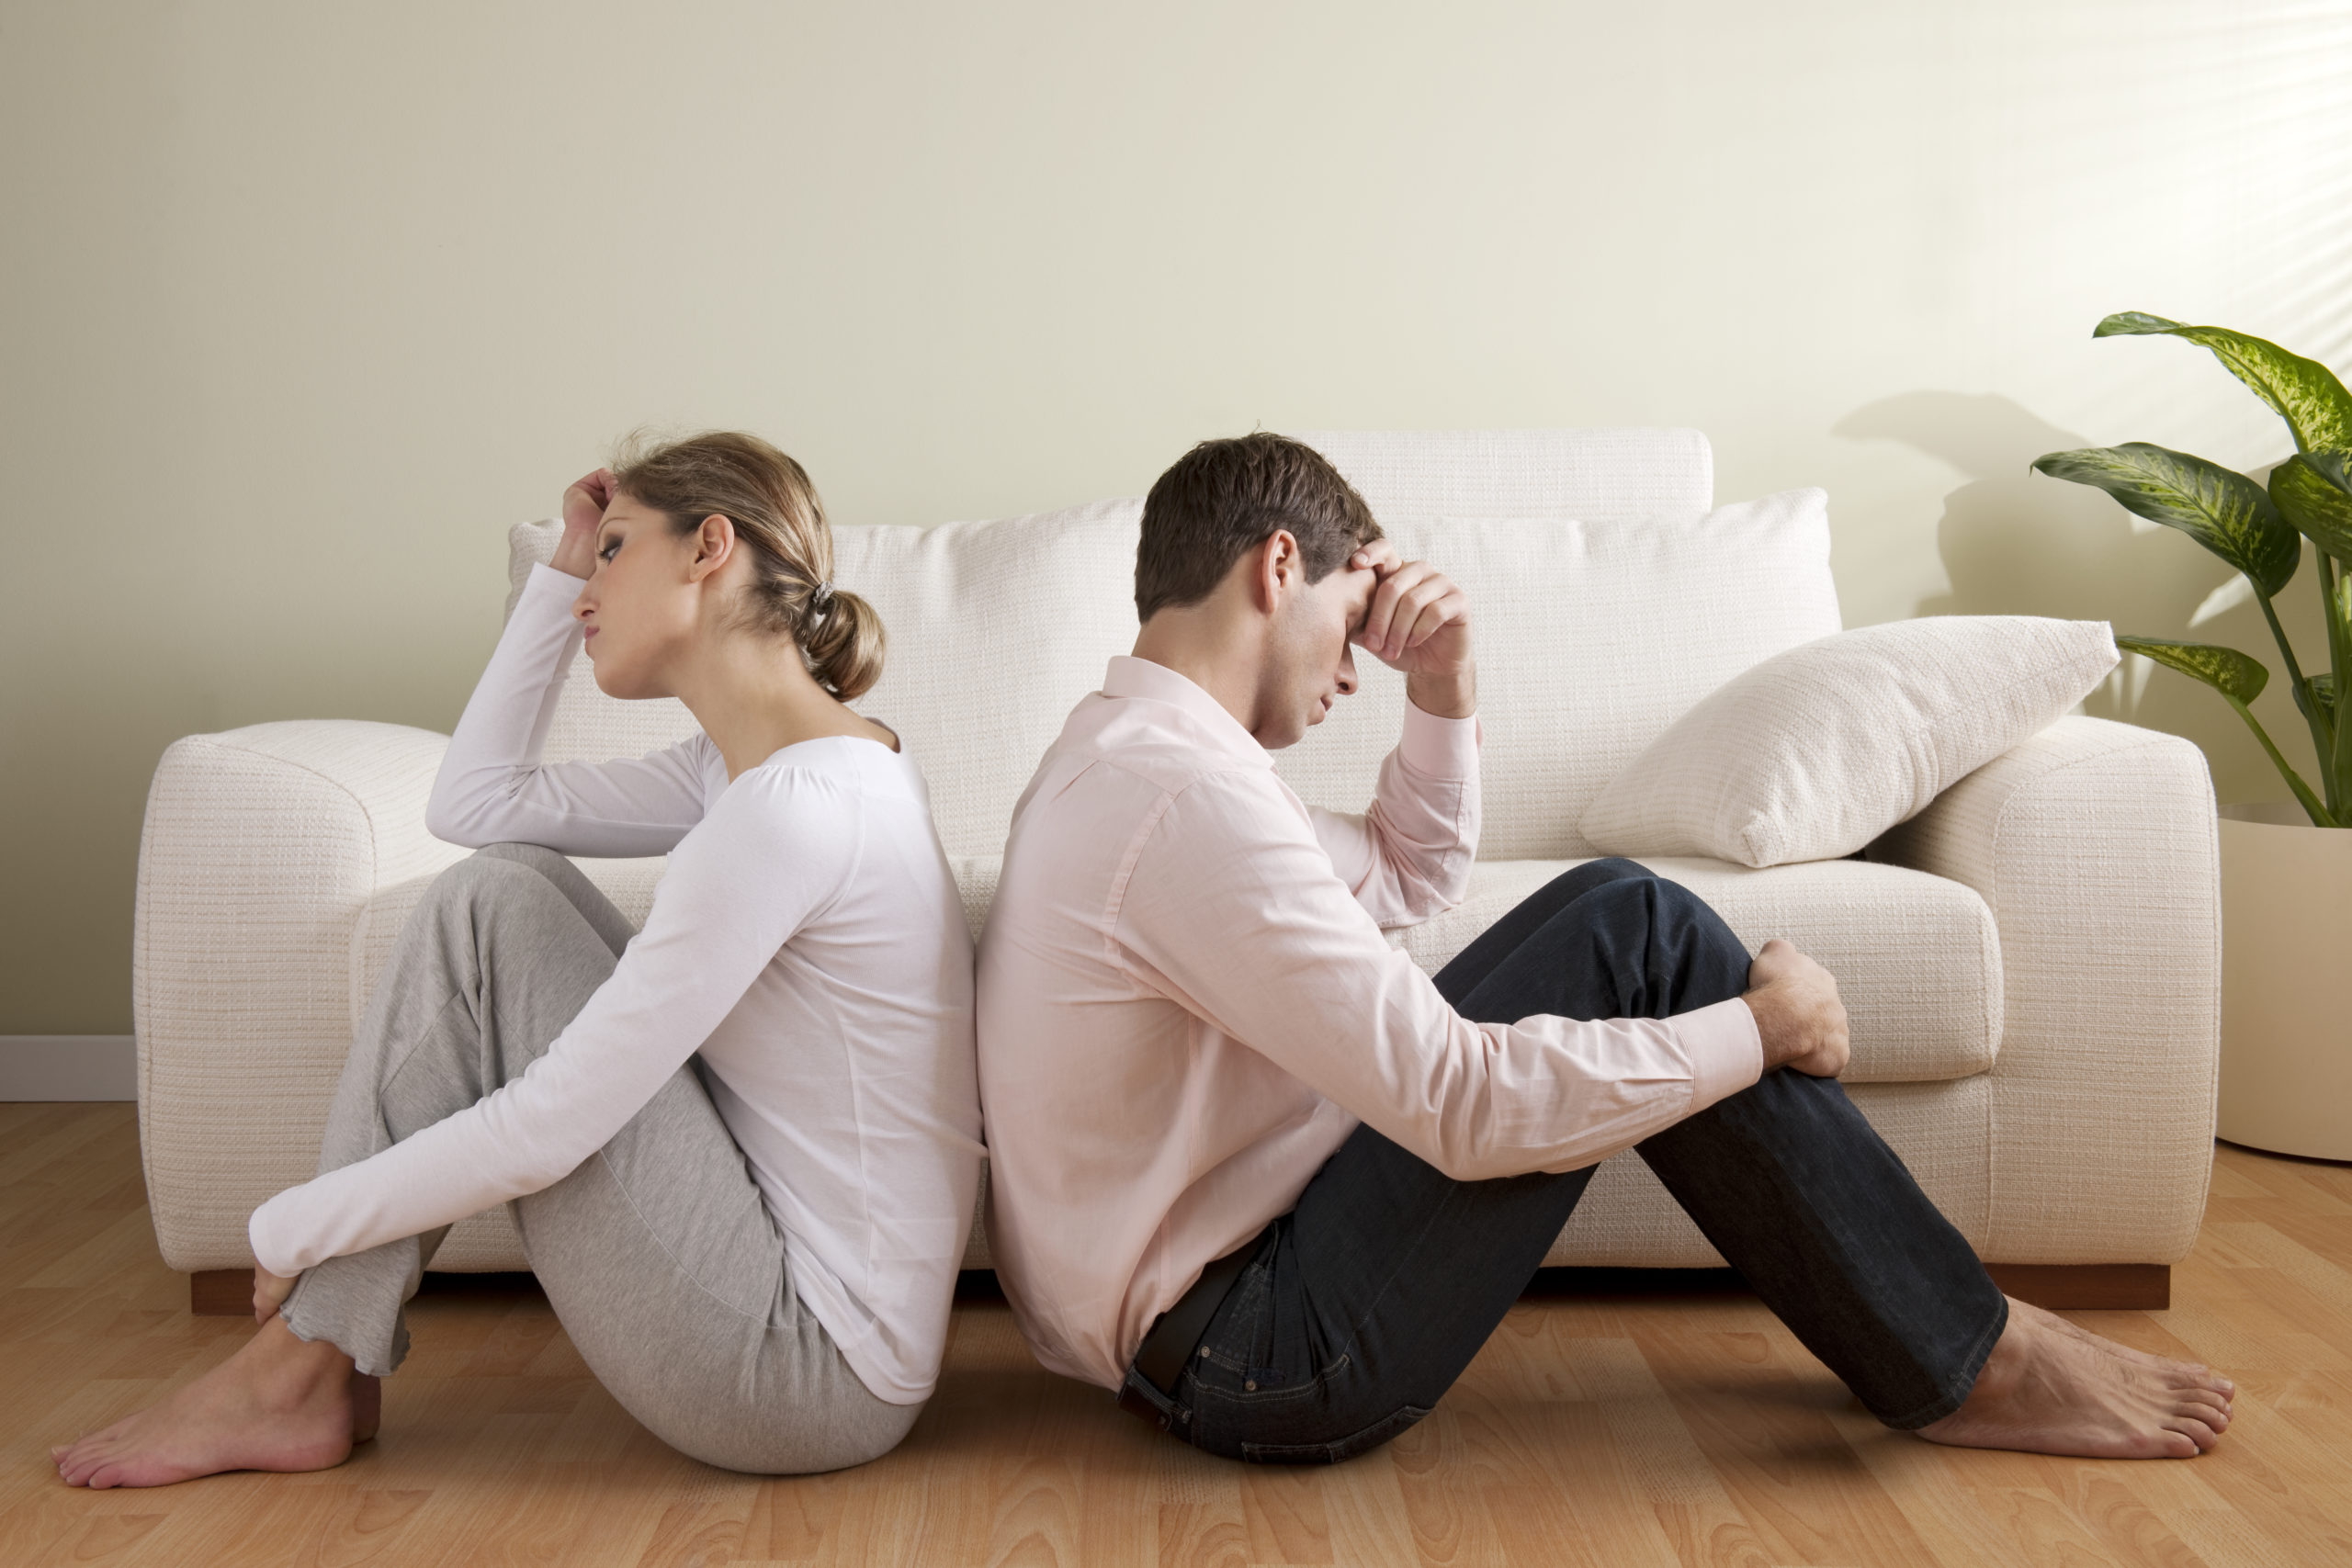 6 misconceptions that make marriage difficult #2